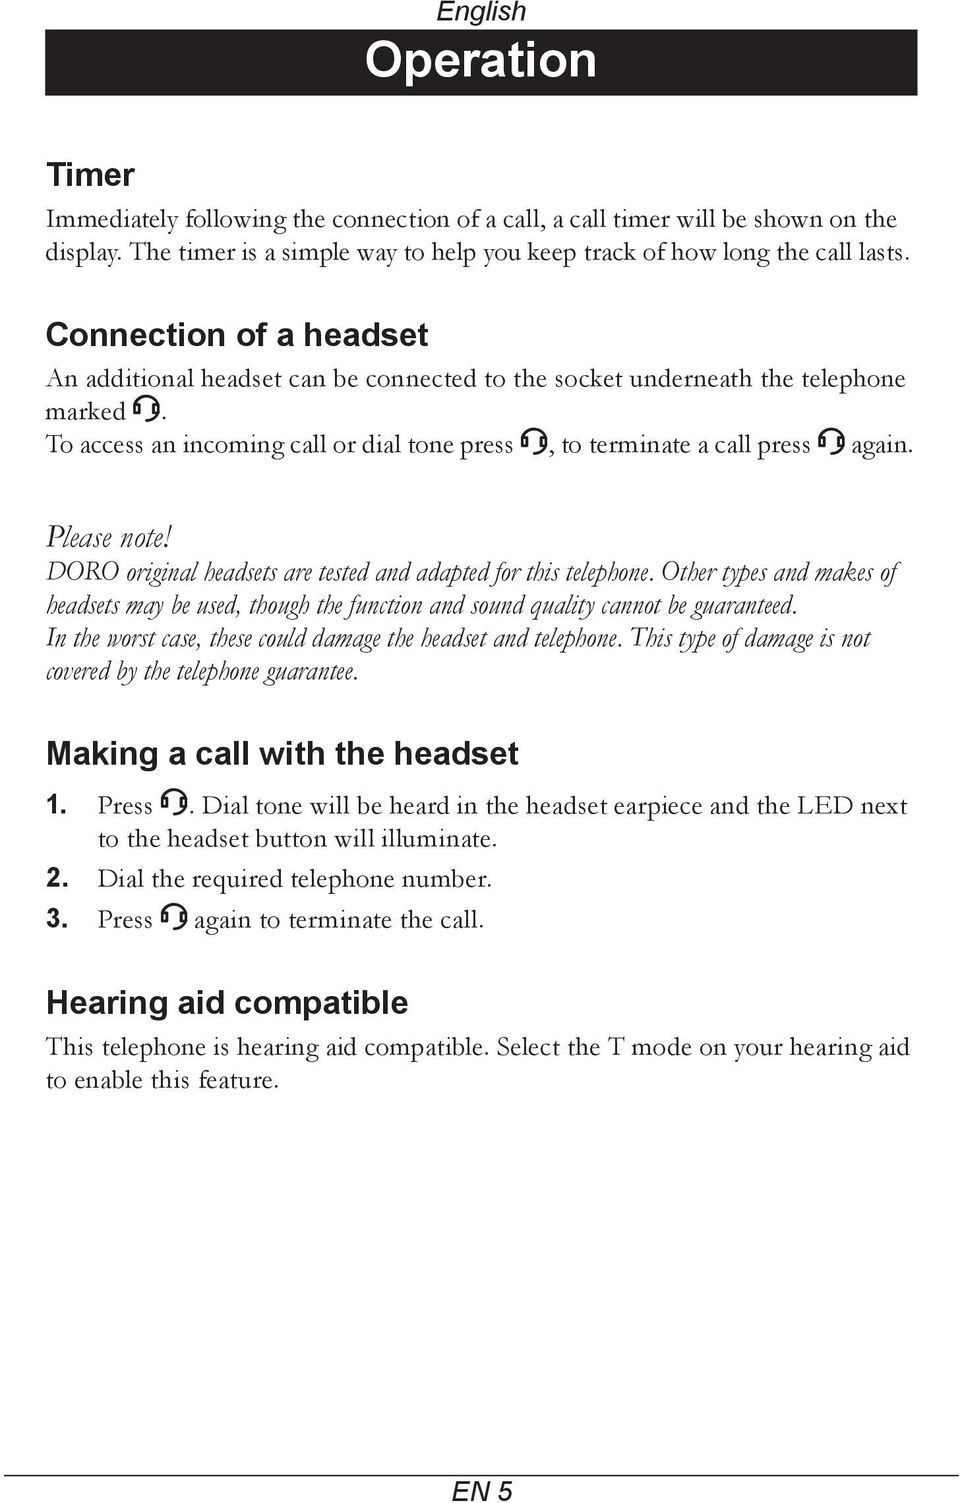 Please note! DORO original headsets are tested and adapted for this telephone. Other types and makes of headsets may be used, though the function and sound quality cannot be guaranteed.